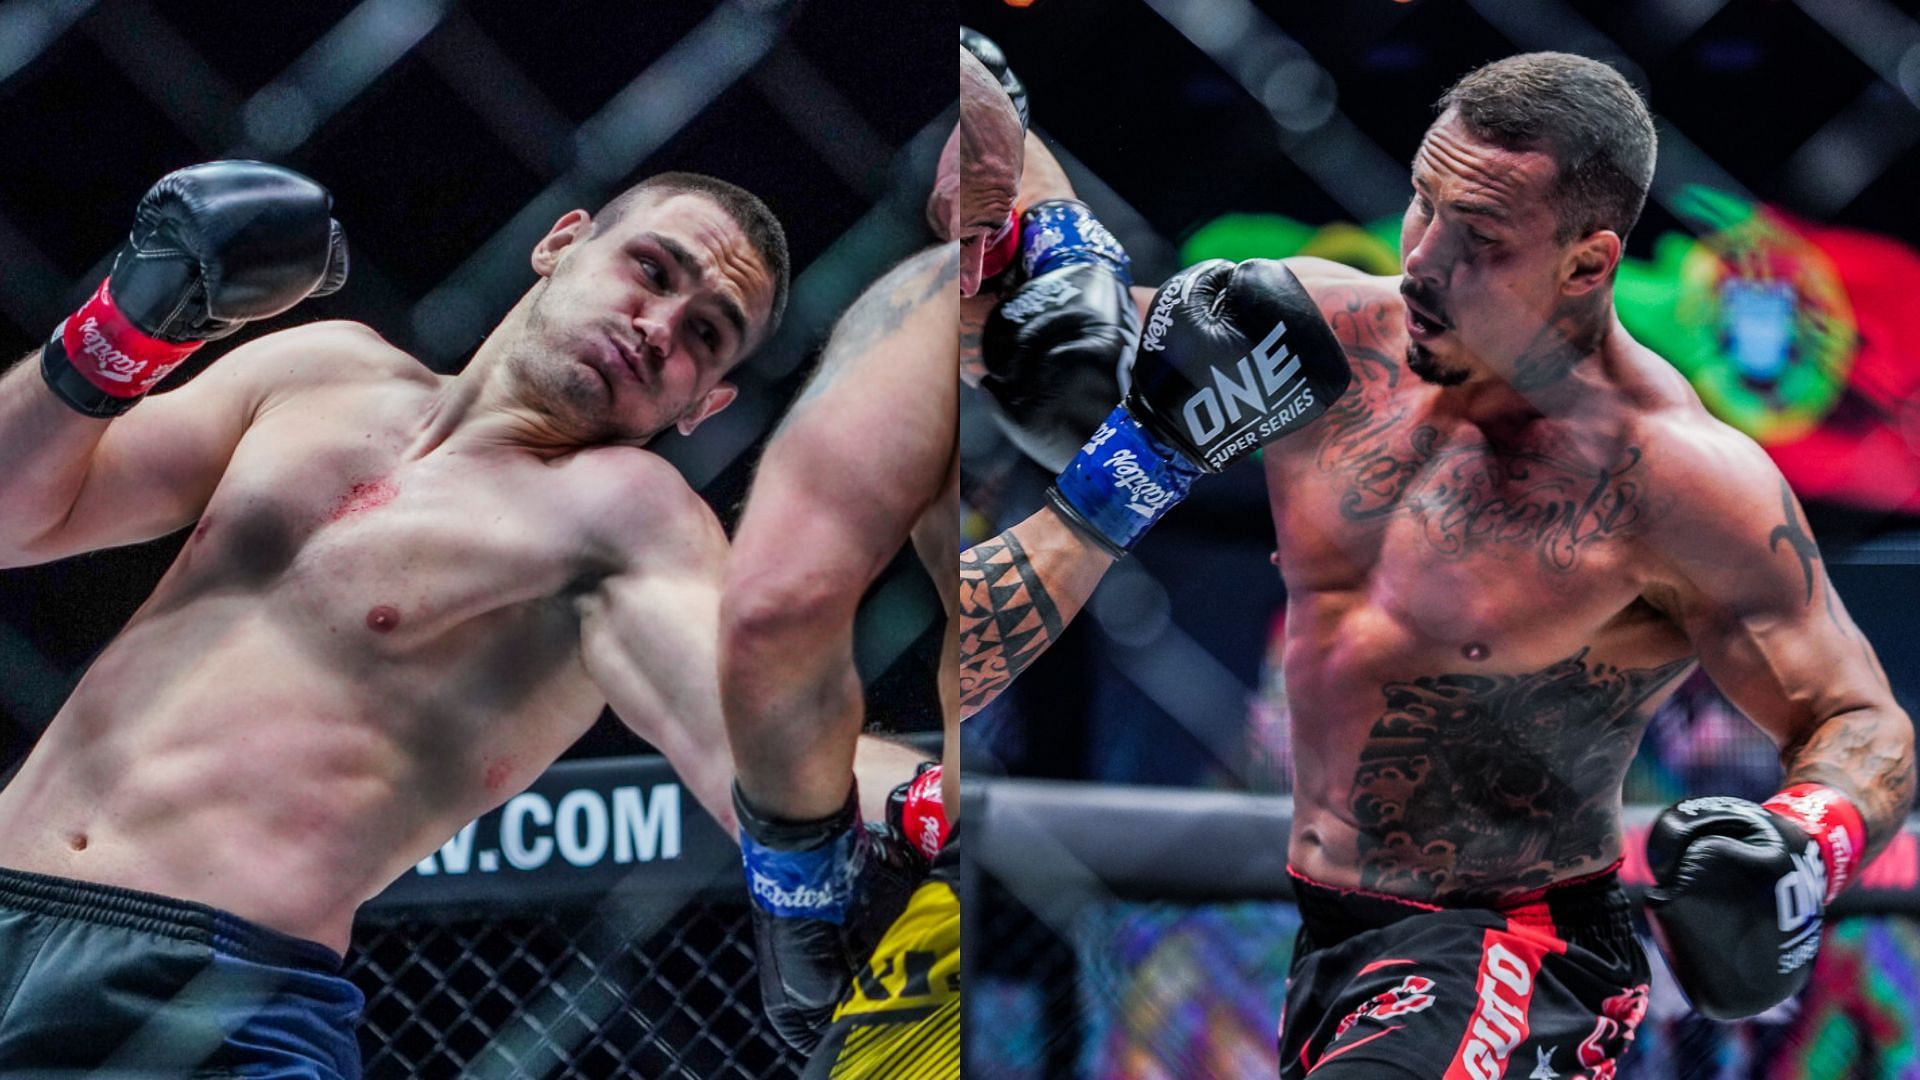 Rade Opacic (left) and Guto Inocente (right) [Photo Credits: ONE Championship]